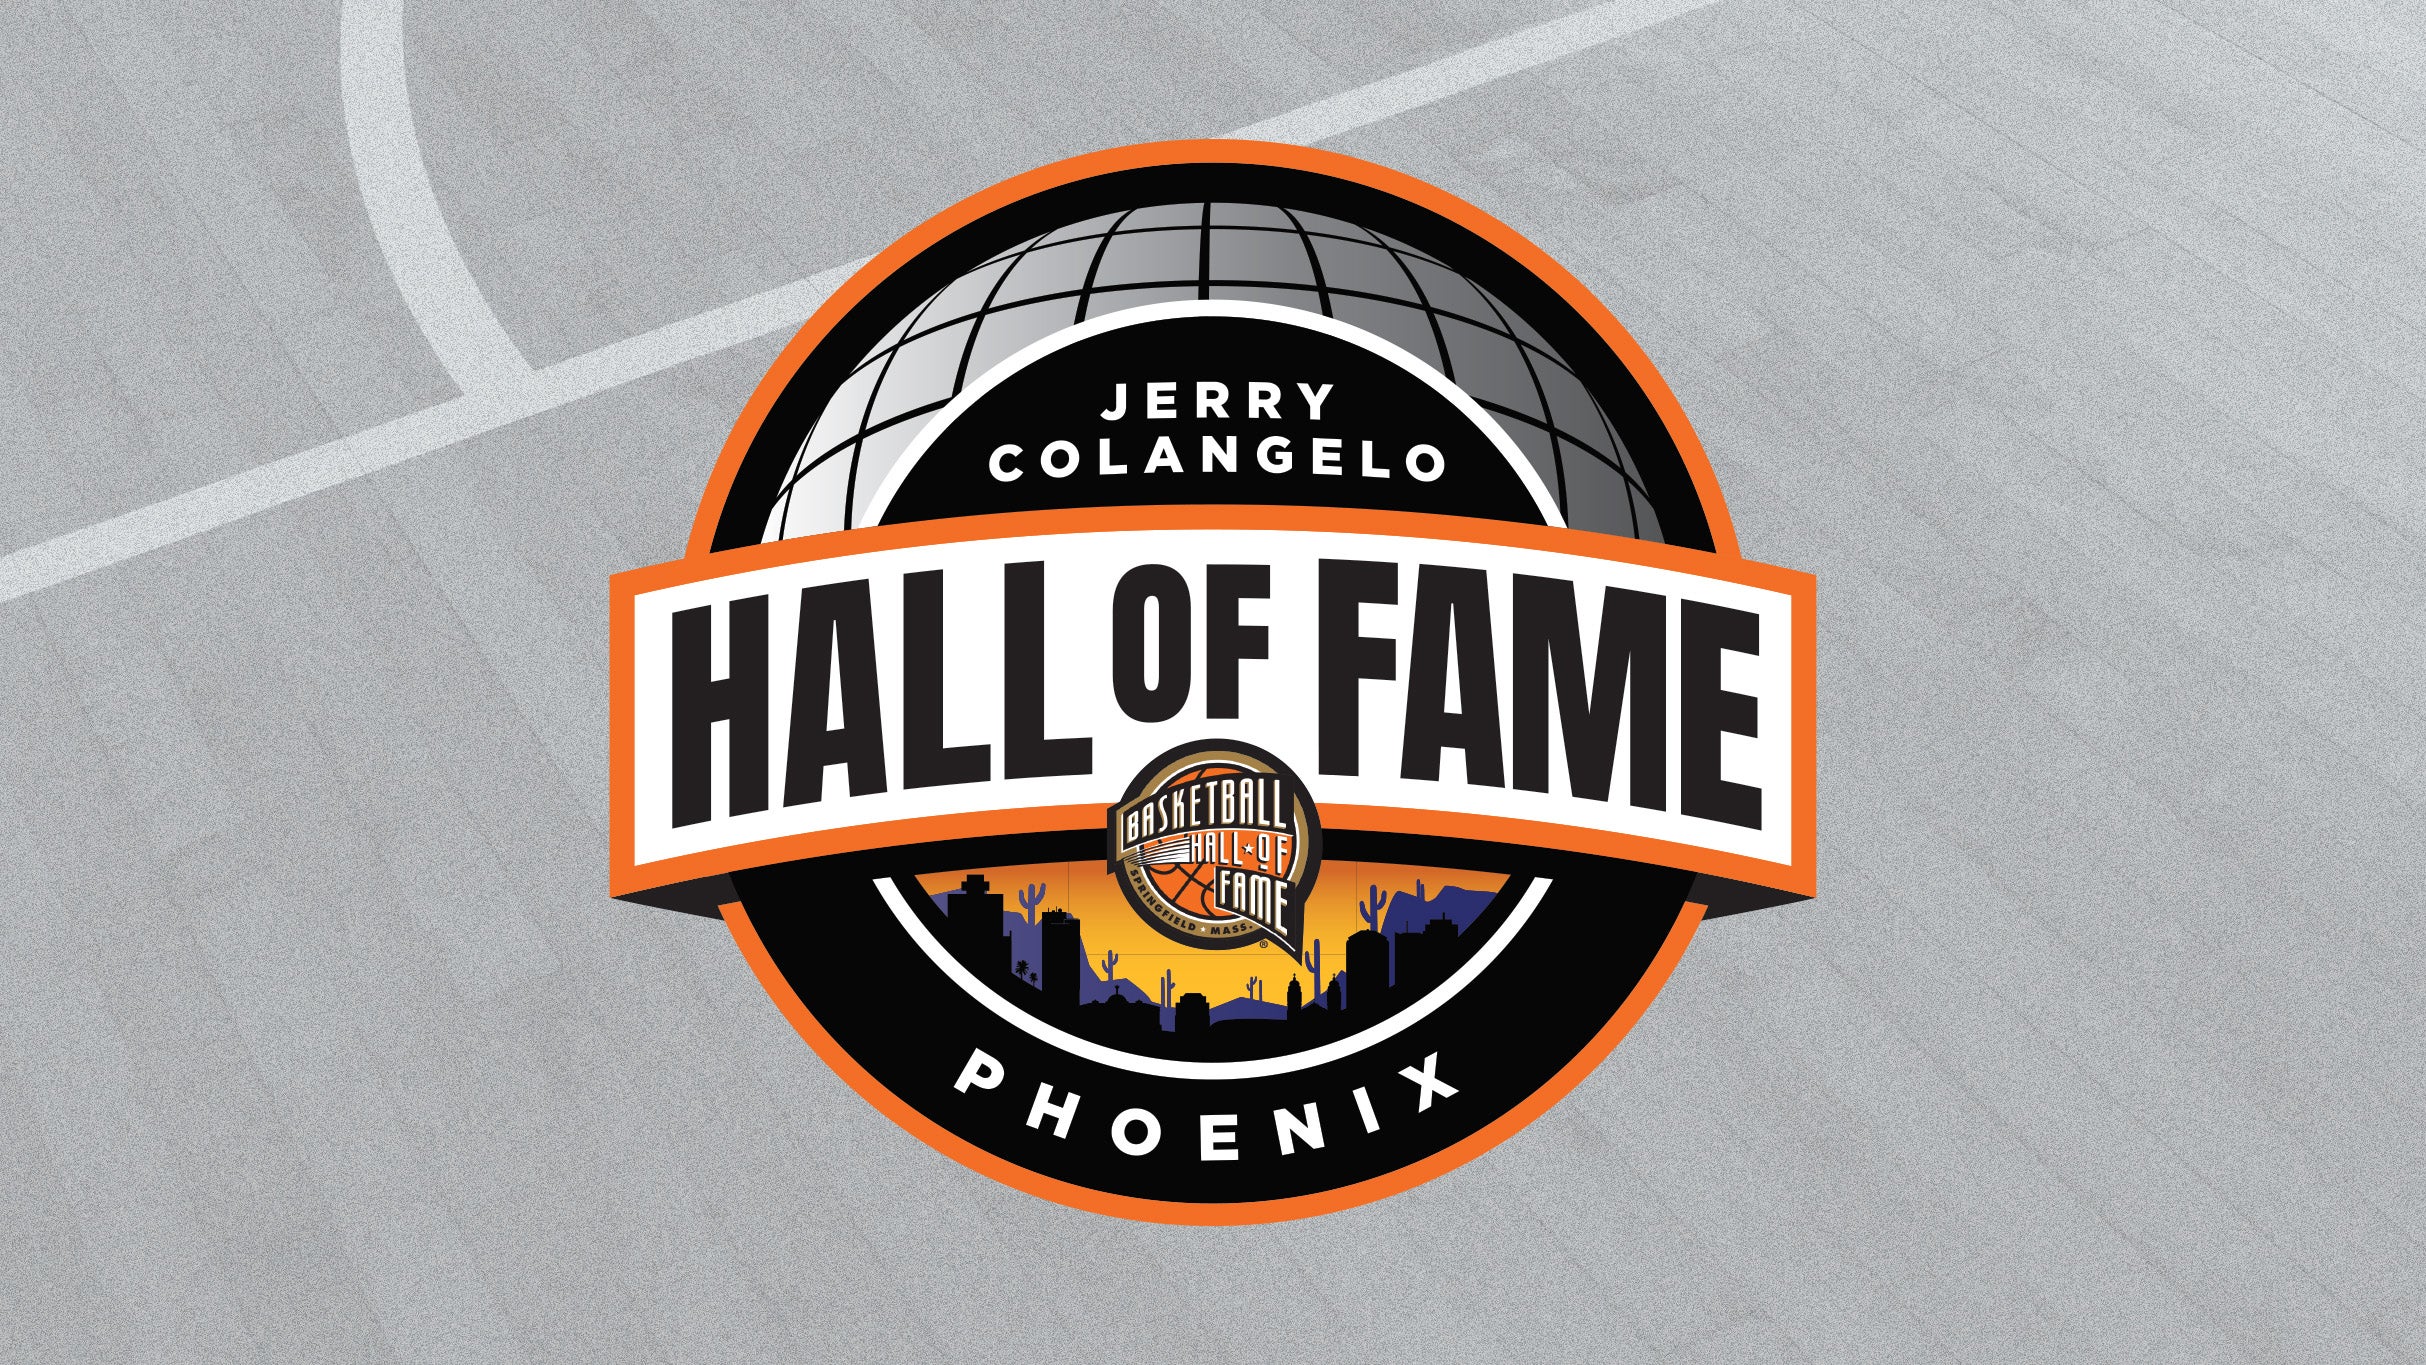 Jerry Colangelo's Hall of Fame - Phoenix - Women's NCAA in Phoenix promo photo for Downtown Live presale offer code